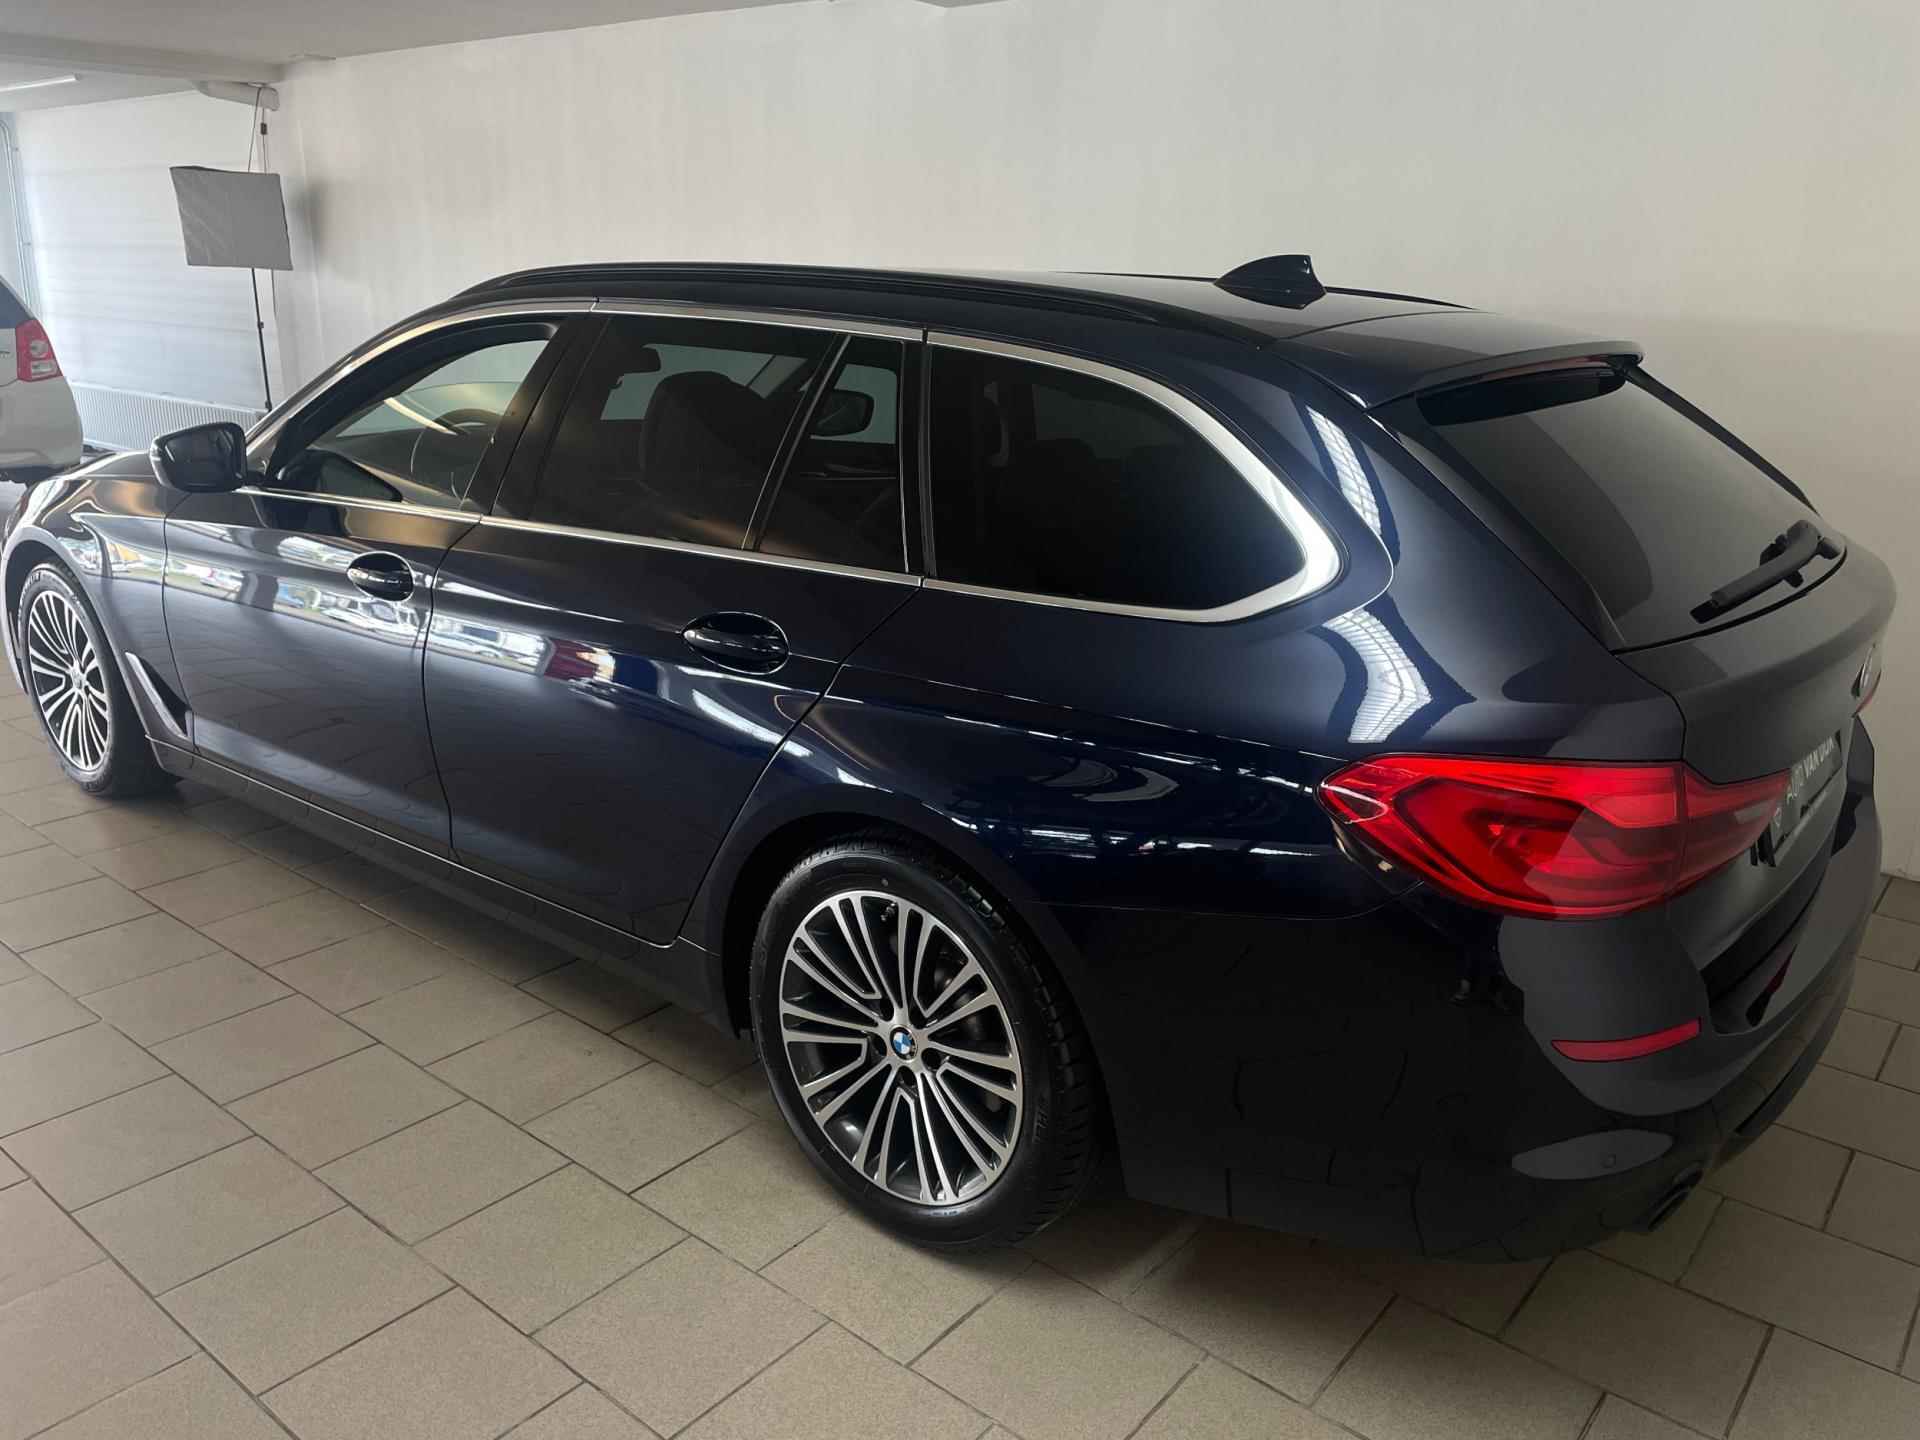 BMW 5-serie Touring 520i High Executive AUTOMAAT NAVI CRUISE BLUETOOTH LED VERL STUURVERW STOELVERW STOELVENT LEDER NIEUWSTAAT - 4/57